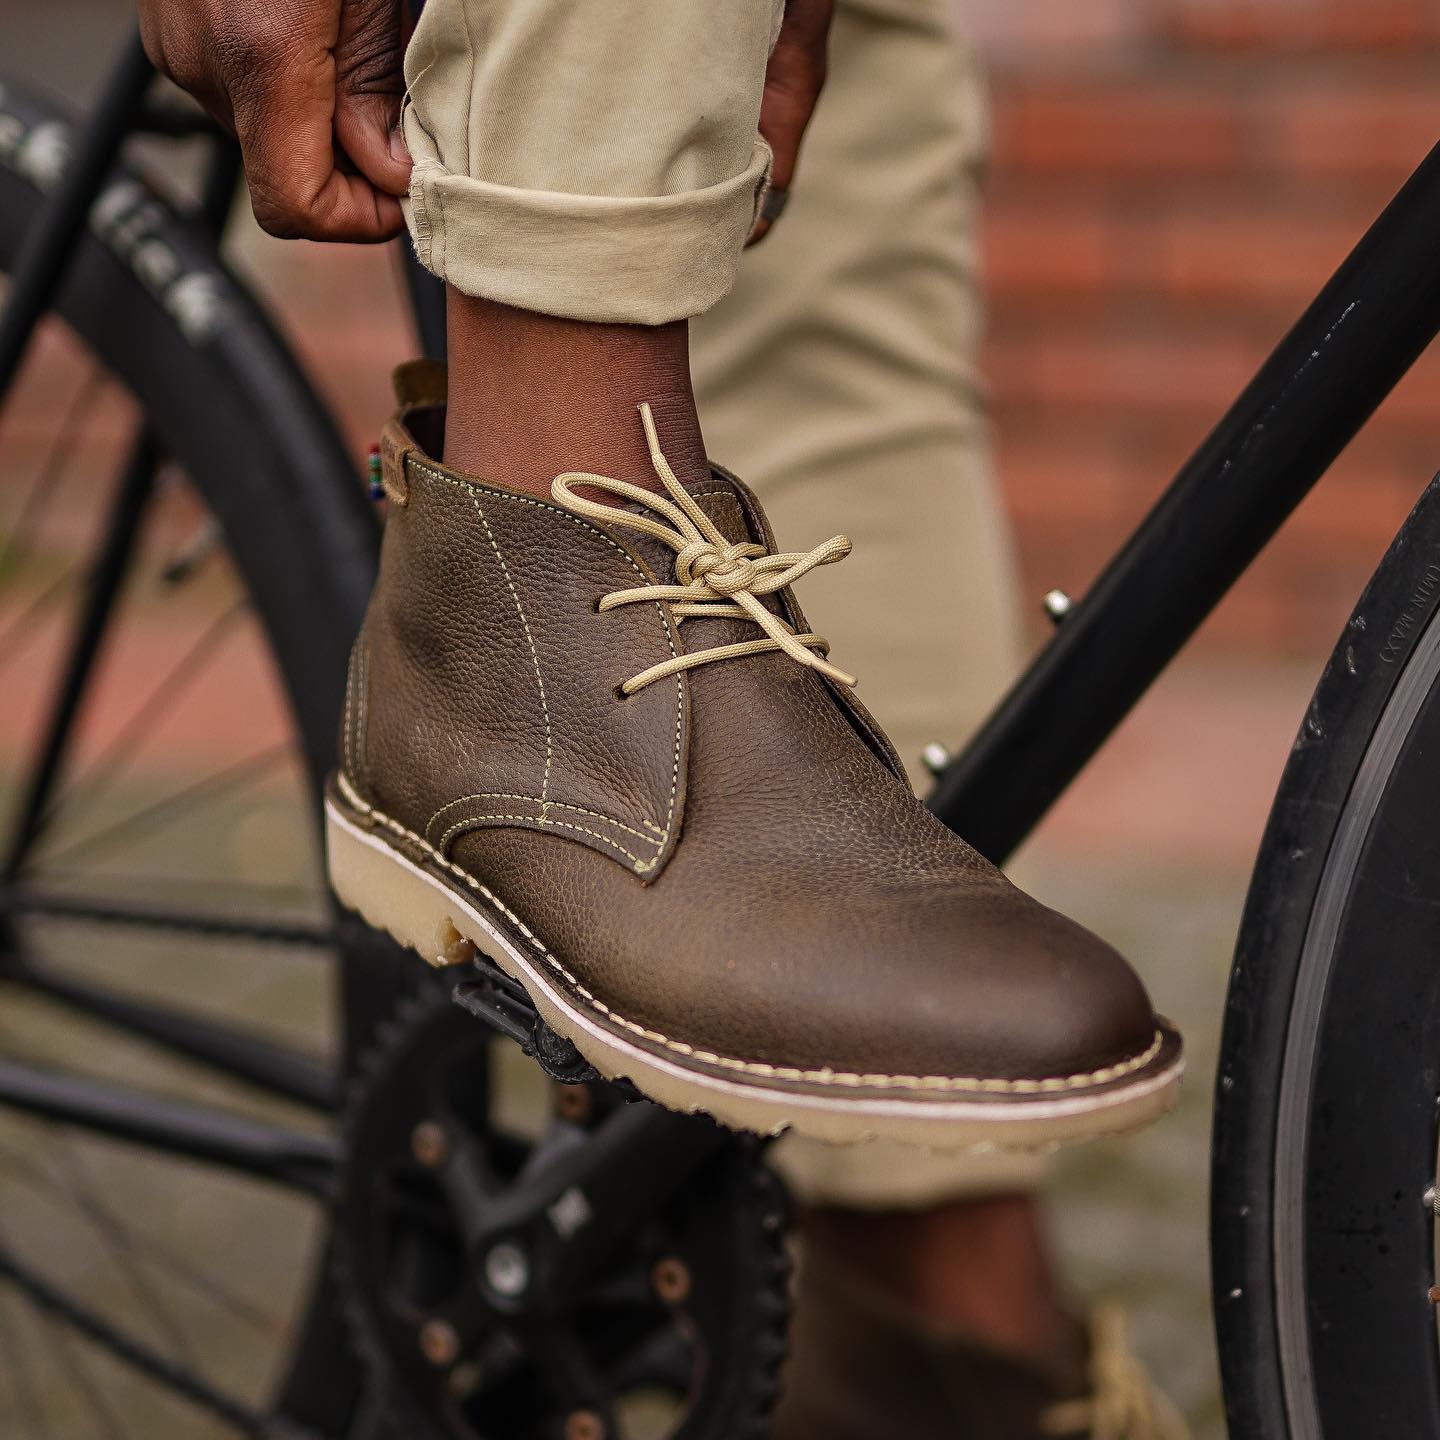 Say Hello to the NEW🔥 Chukka in Town! ⁠⁠
.⁠⁠
8feet | Limited Edition Veldskoen x Du Toit Brothers Collaboration. Hand-stiched Brown Leather designed for comfort and adventure. #fallvibes